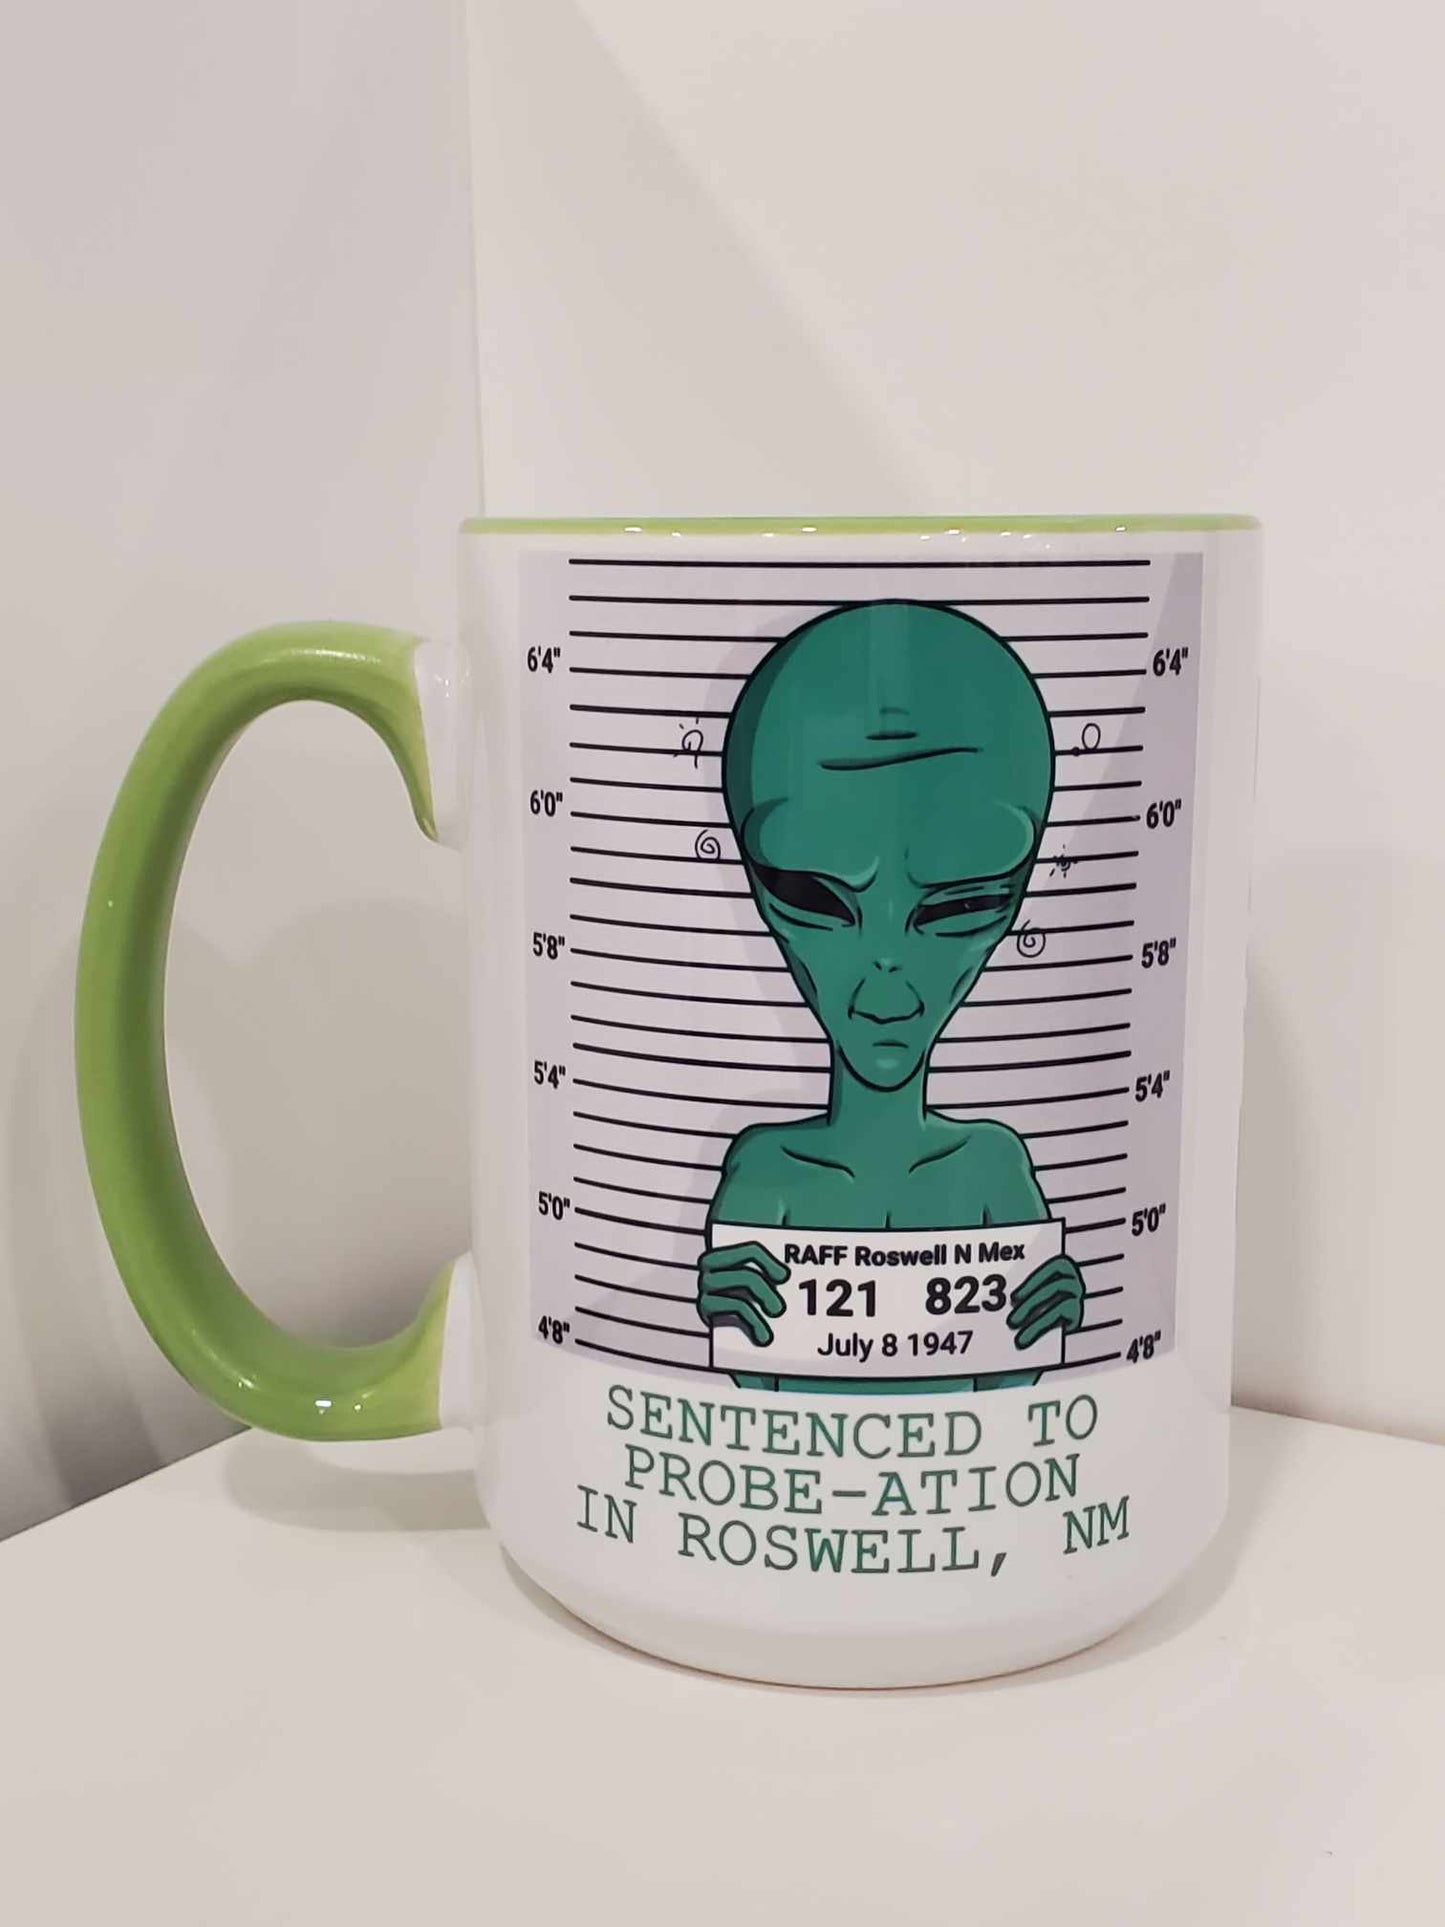 Sentenced to Probe-Ation, Flying While Intoxicated 15oz Coffee Mug Green